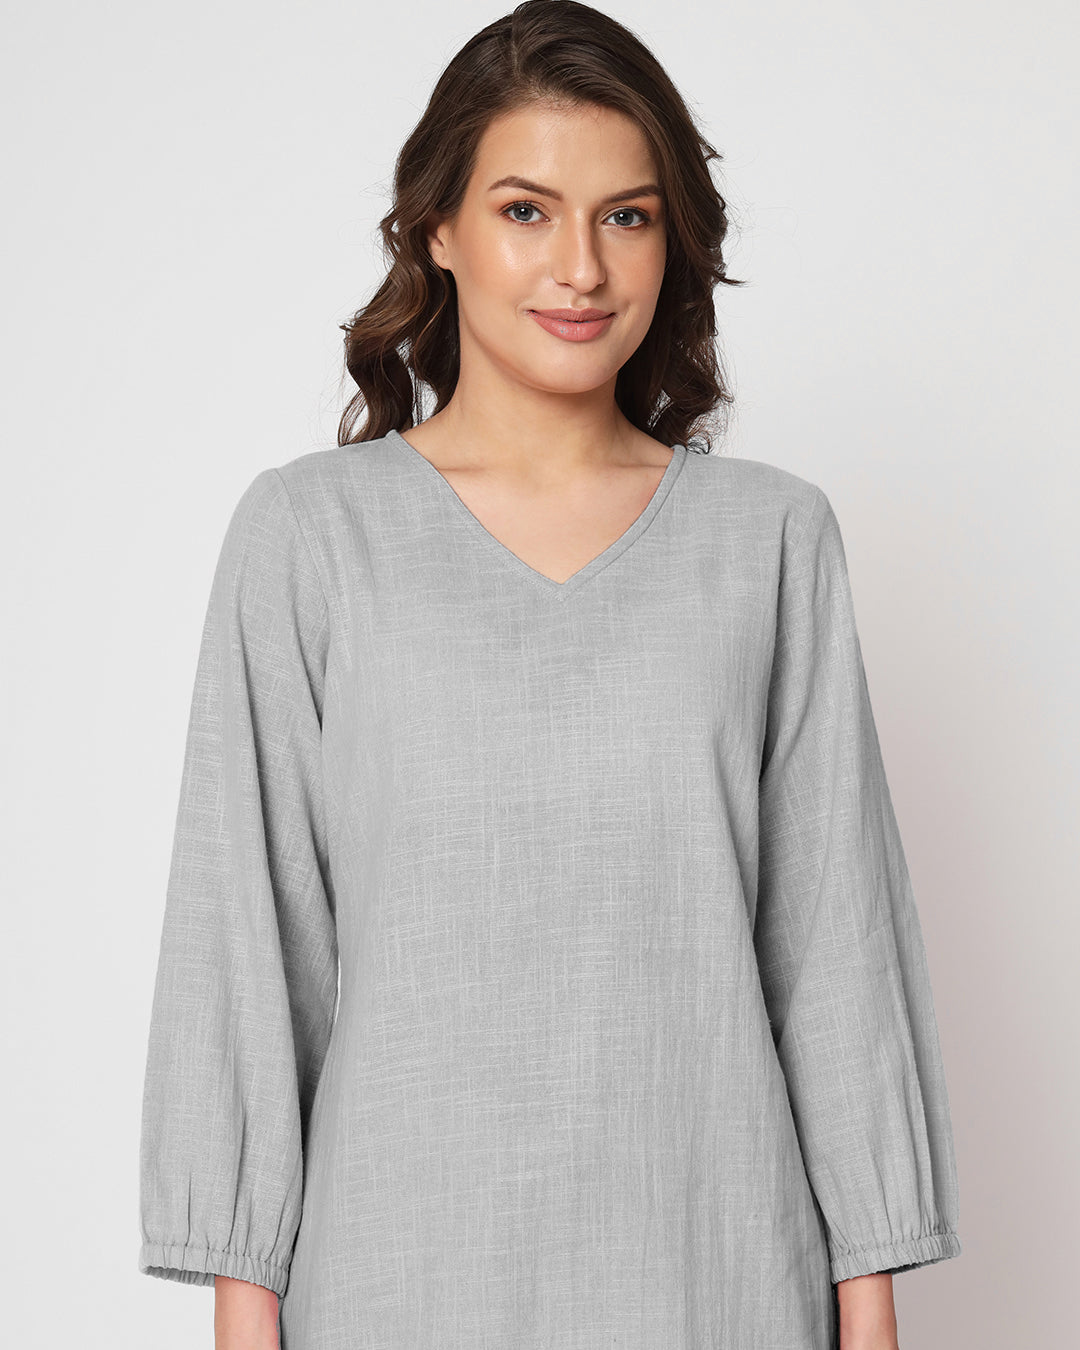 Iced Grey Bishop Sleeves Solid Top (Without Bottoms)